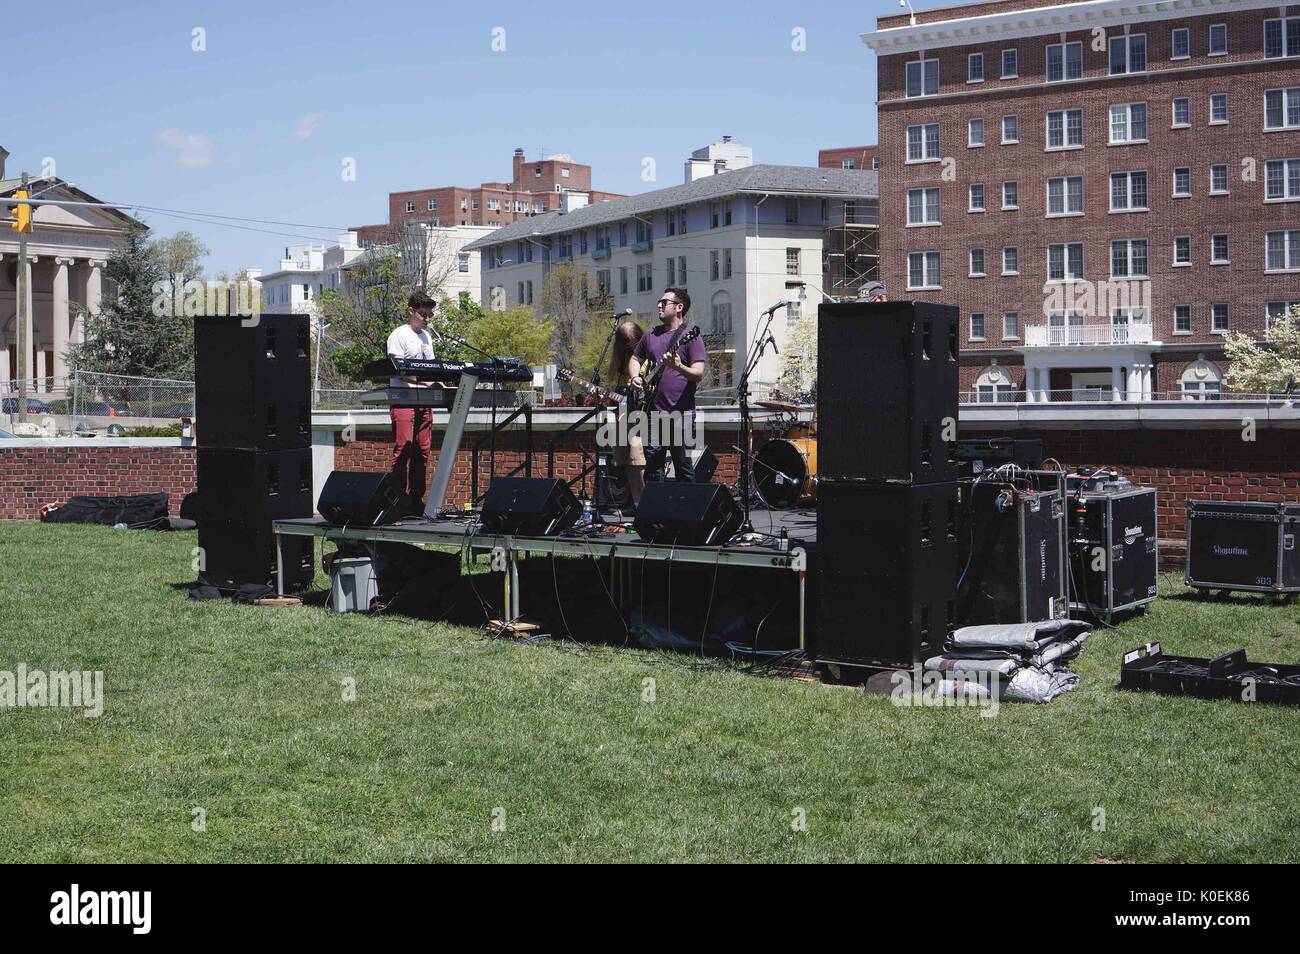 A band plays during Spring Fair, an annual festival with music, food, shopping, and more that takes place every spring on the Homewood campus of the Johns Hopkins University in Baltimore, Maryland. 2014. Courtesy Eric Chen. Stock Photo